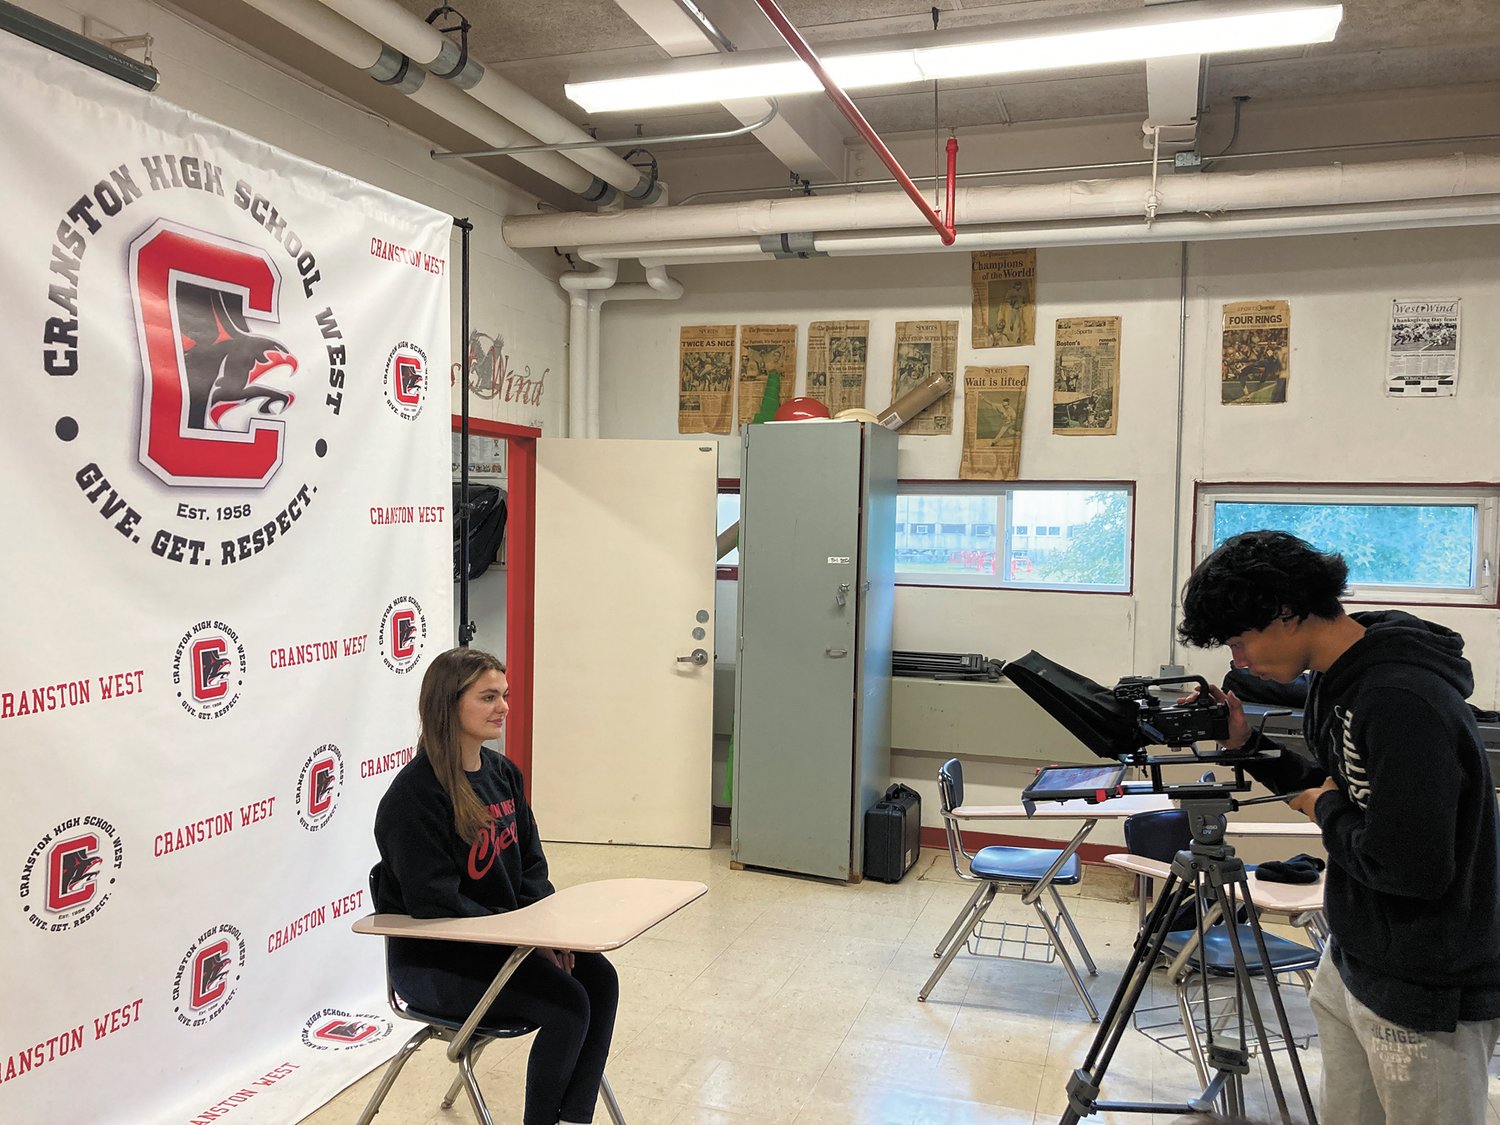 ON AIR: Eric Zhang readies the camera while Gisele Rotolu sits in front of Cranston West’s backdrop gearing up to read from the teleprompter. (Herald photo)